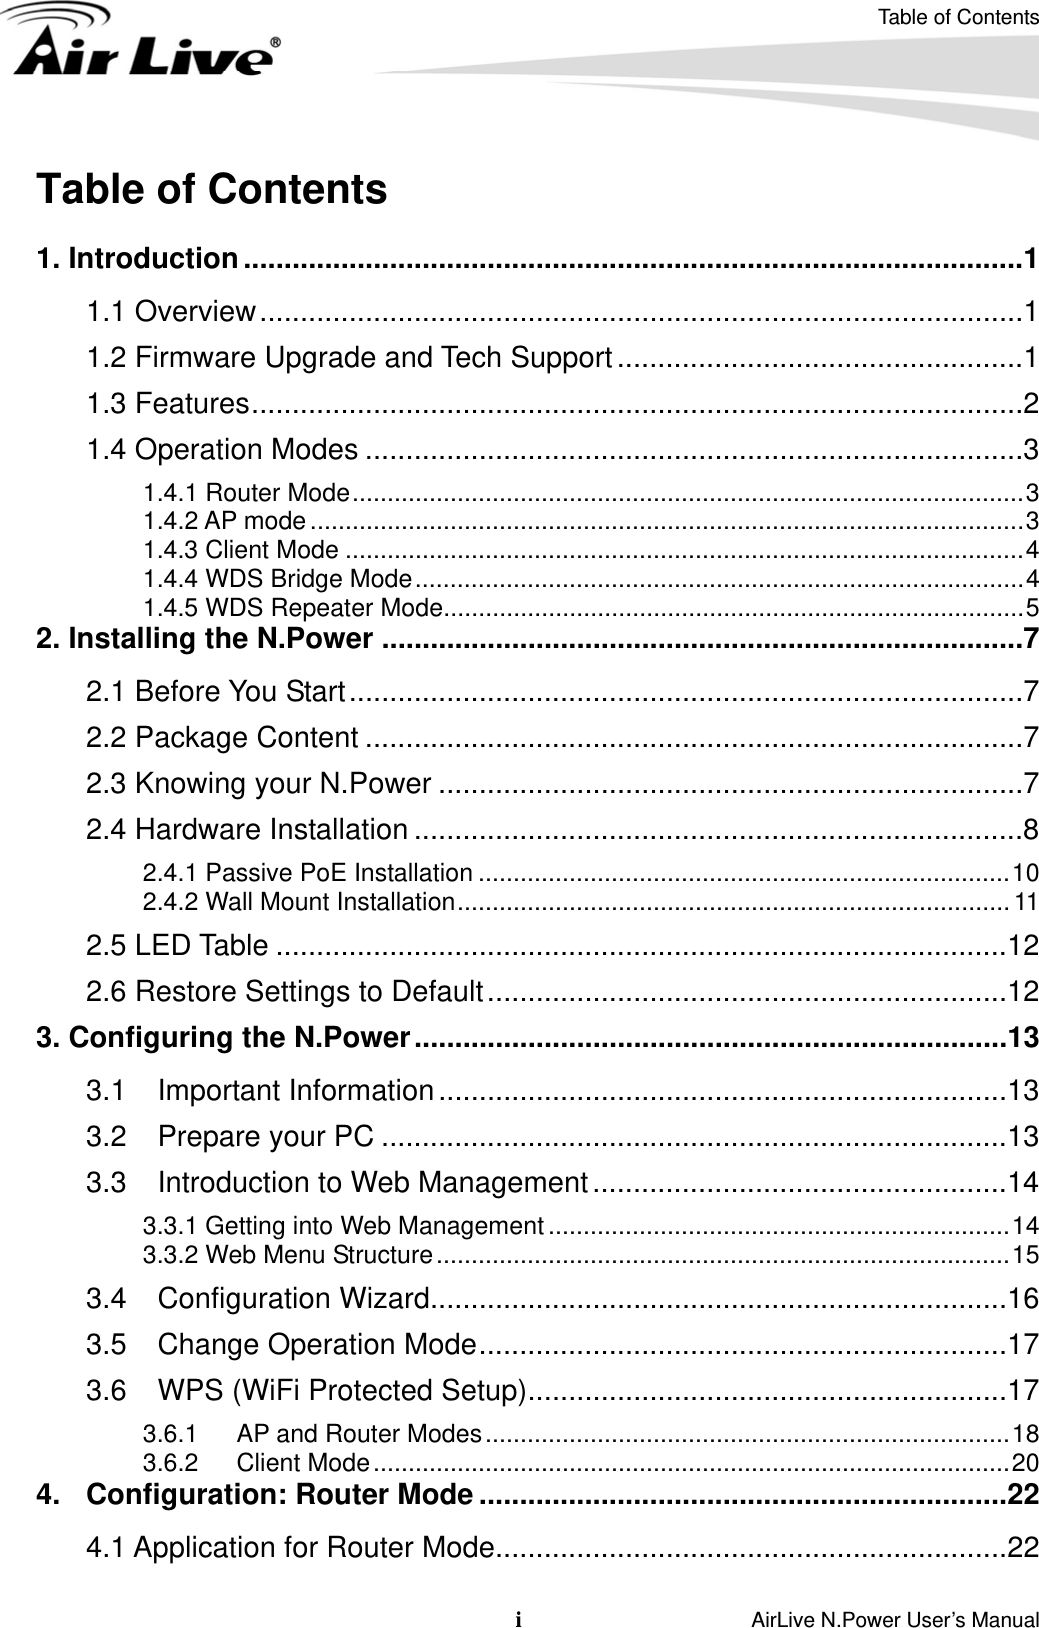 Table of Contents i                    AirLive N.Power User’s Manual Table of Contents  1. Introduction................................................................................................1 1.1 Overview..............................................................................................1 1.2 Firmware Upgrade and Tech Support..................................................1 1.3 Features...............................................................................................2 1.4 Operation Modes .................................................................................3 1.4.1 Router Mode................................................................................................3 1.4.2 AP mode ......................................................................................................3 1.4.3 Client Mode .................................................................................................4 1.4.4 WDS Bridge Mode.......................................................................................4 1.4.5 WDS Repeater Mode...................................................................................5 2. Installing the N.Power ...............................................................................7 2.1 Before You Start...................................................................................7 2.2 Package Content .................................................................................7 2.3 Knowing your N.Power ........................................................................7 2.4 Hardware Installation ...........................................................................8 2.4.1 Passive PoE Installation ............................................................................10 2.4.2 Wall Mount Installation............................................................................... 11 2.5 LED Table ..........................................................................................12 2.6 Restore Settings to Default................................................................12 3. Configuring the N.Power.........................................................................13 3.1 Important Information......................................................................13 3.2 Prepare your PC .............................................................................13 3.3 Introduction to Web Management...................................................14 3.3.1 Getting into Web Management..................................................................14 3.3.2 Web Menu Structure..................................................................................15 3.4 Configuration Wizard.......................................................................16 3.5 Change Operation Mode.................................................................17 3.6 WPS (WiFi Protected Setup)...........................................................17 3.6.1  AP and Router Modes...........................................................................18 3.6.2 Client Mode...........................................................................................20 4. Configuration: Router Mode .................................................................22 4.1 Application for Router Mode...............................................................22 